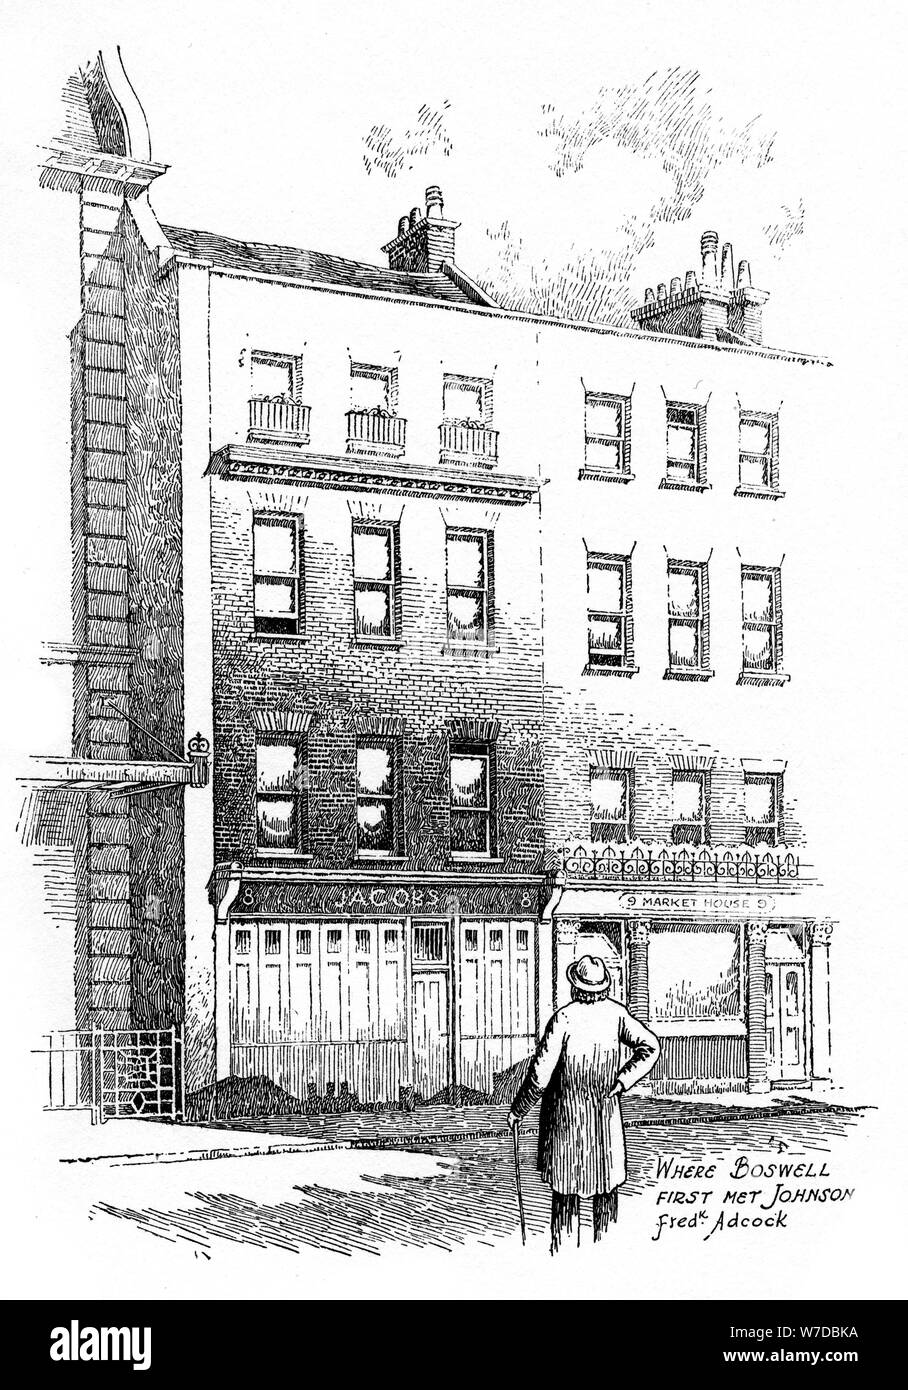 Where James Boswell first met Dr Johnson, London, (1912). Artist: Frederick Adcock Stock Photo